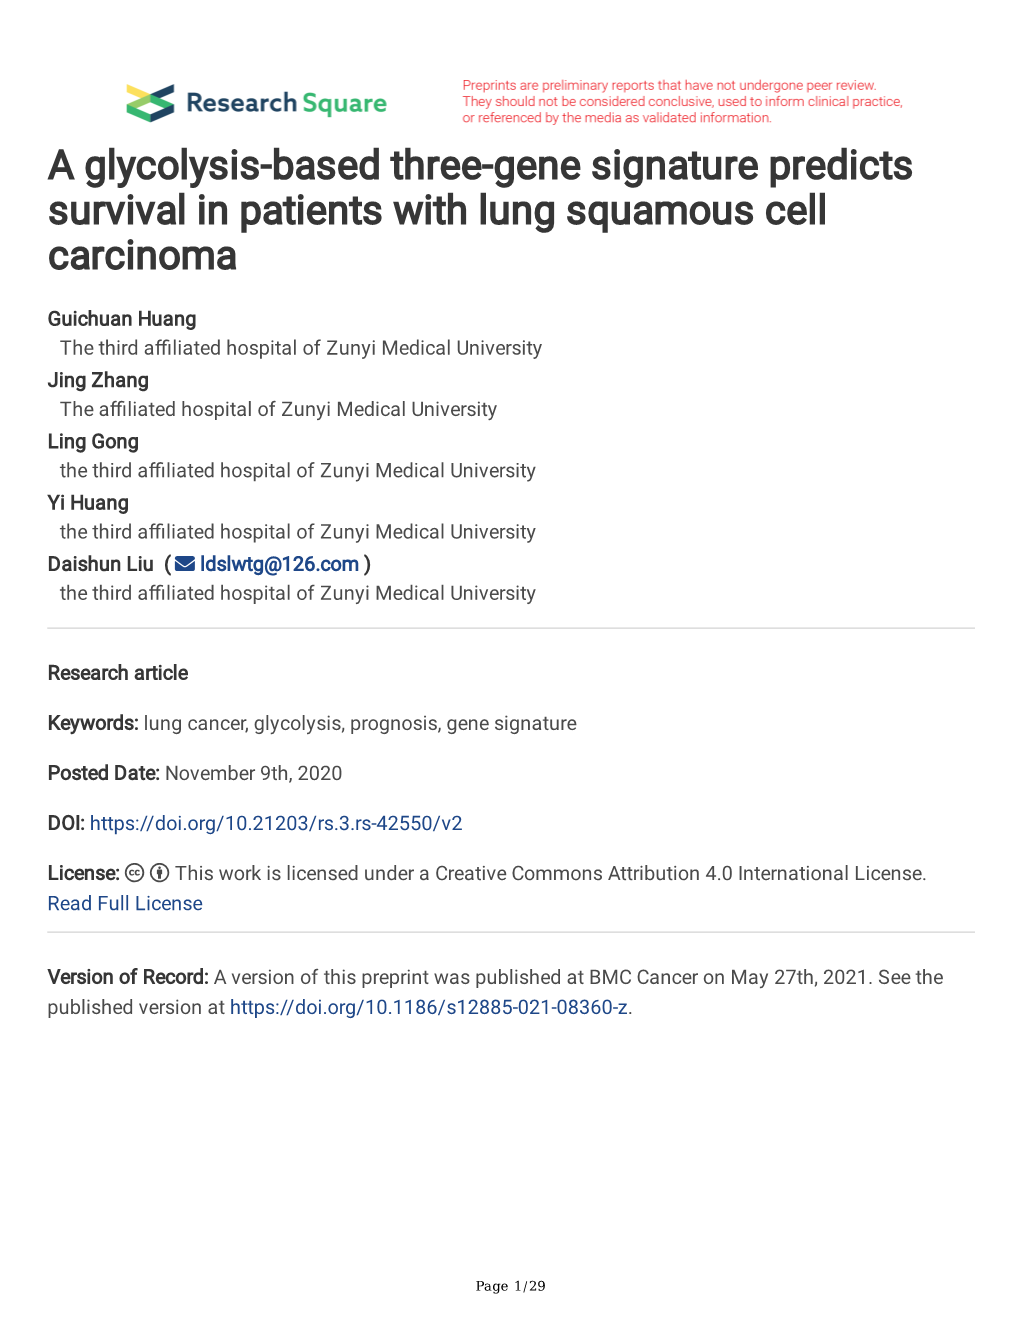 A Glycolysis-Based Three-Gene Signature Predicts Survival in Patients with Lung Squamous Cell Carcinoma